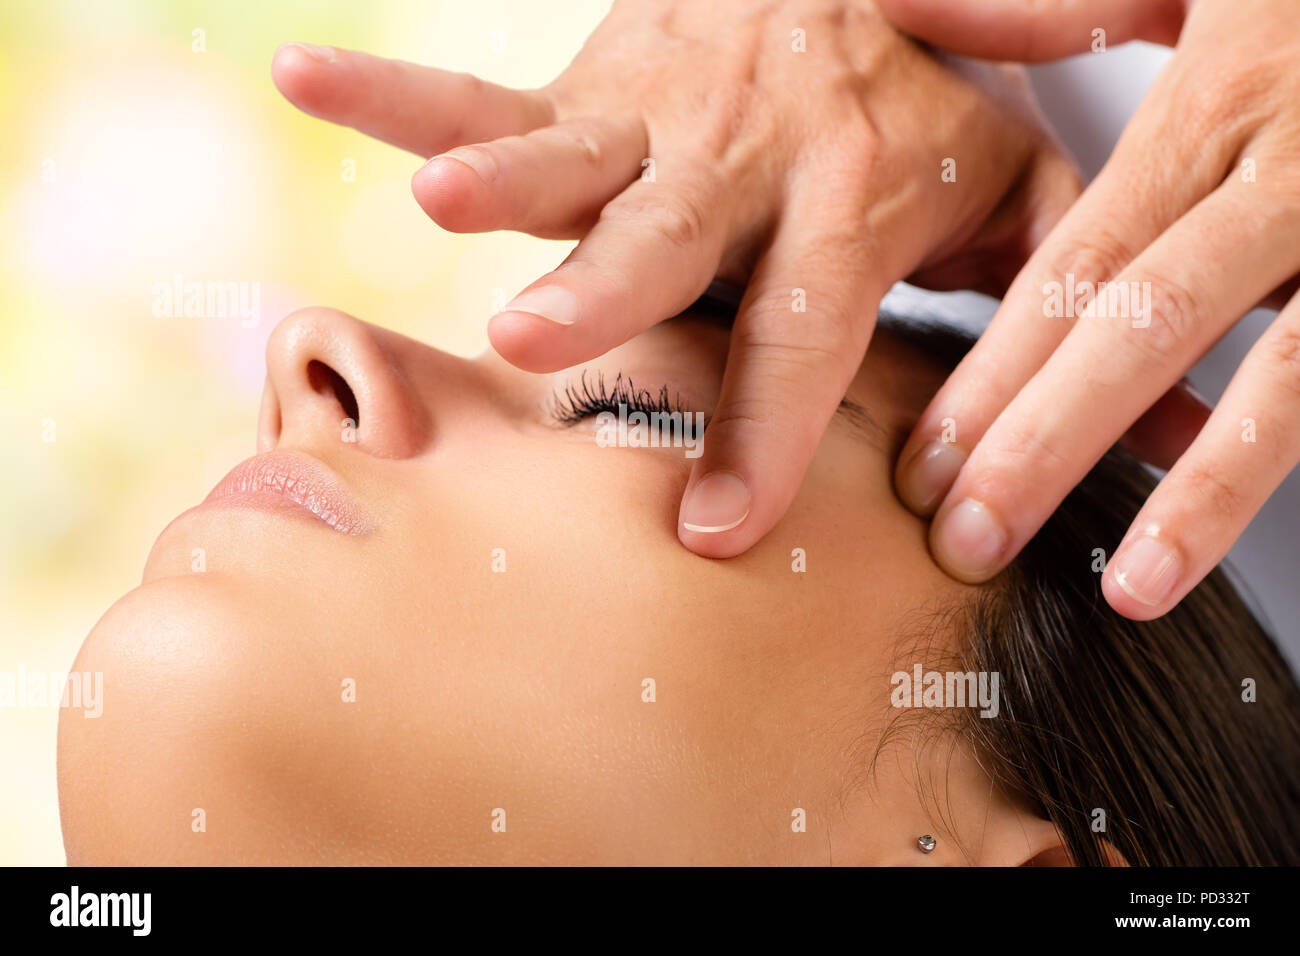 Extreme close up portrait of woman having beauty facial treatment. Therapist doing massage with product on cheek. Stock Photo